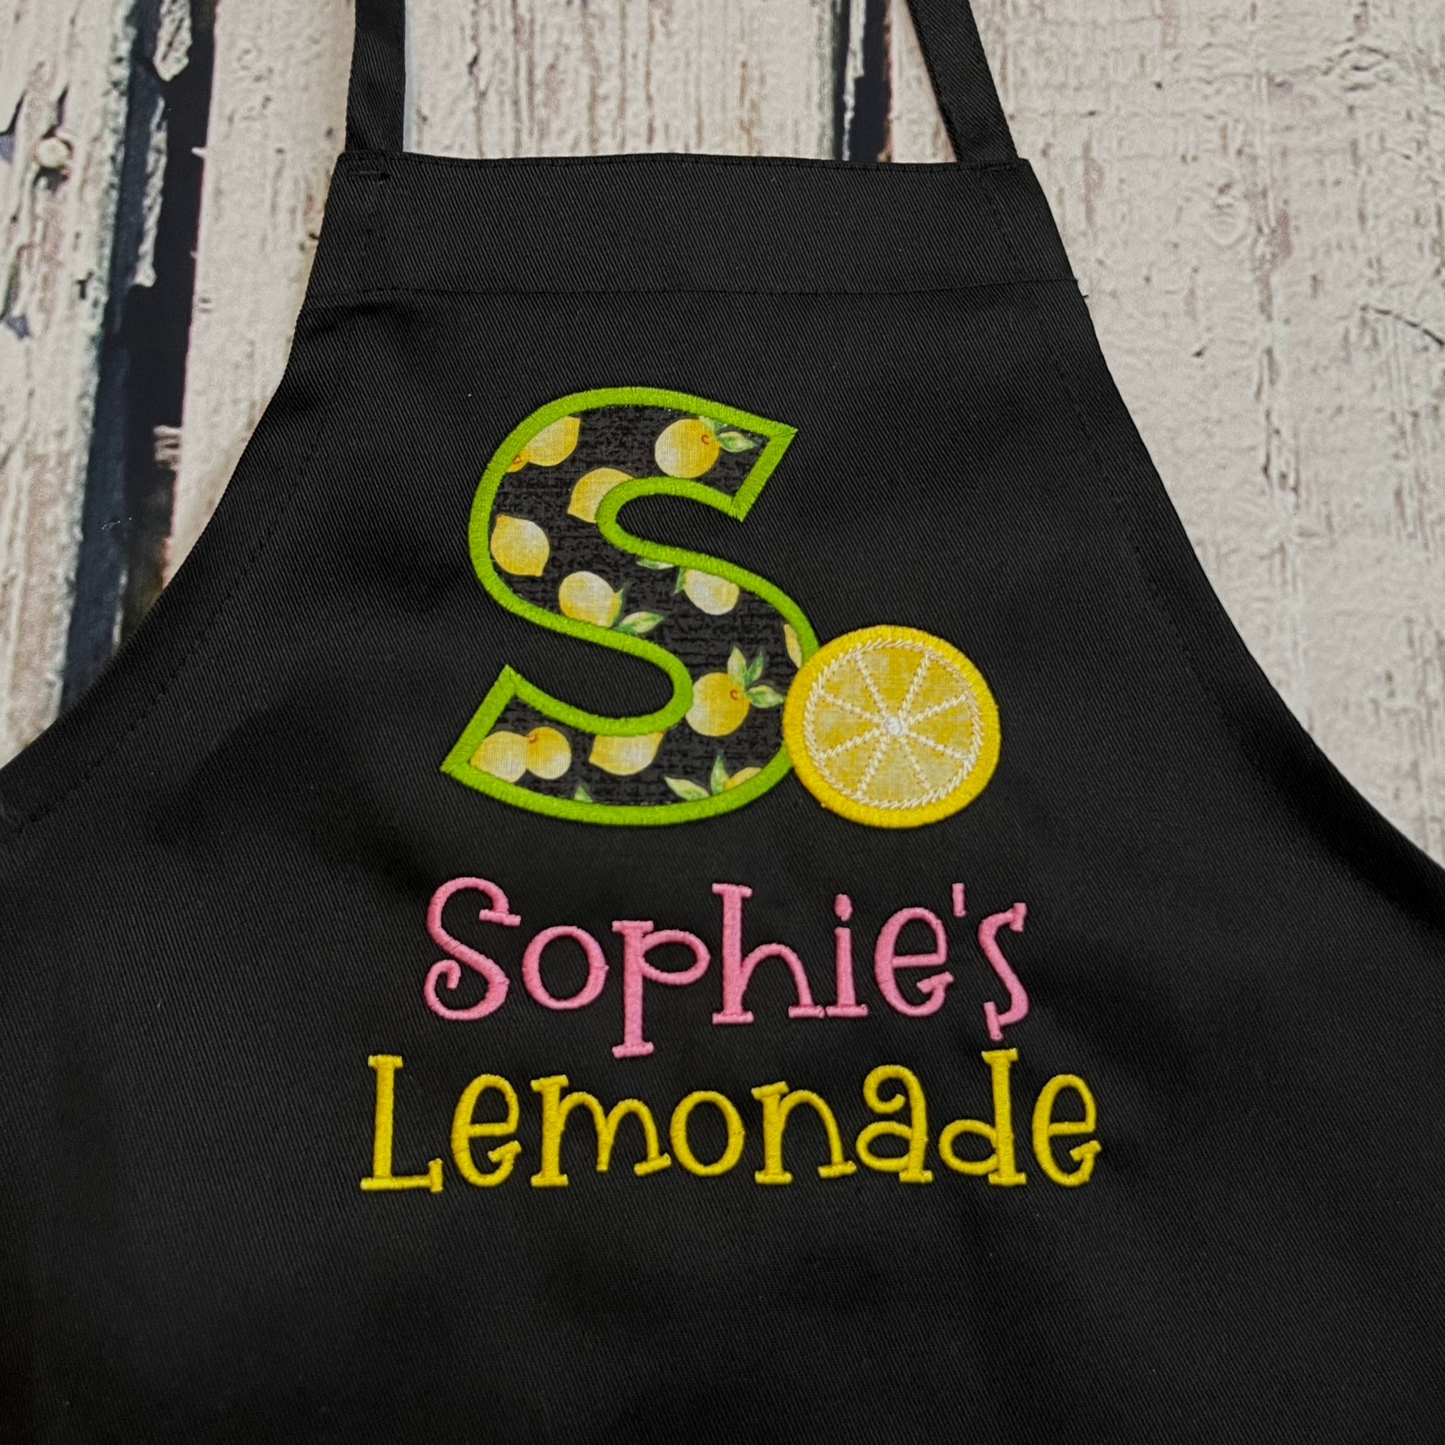 Child's embroidered personalized lemonade stand apron with their initial and name on black apron